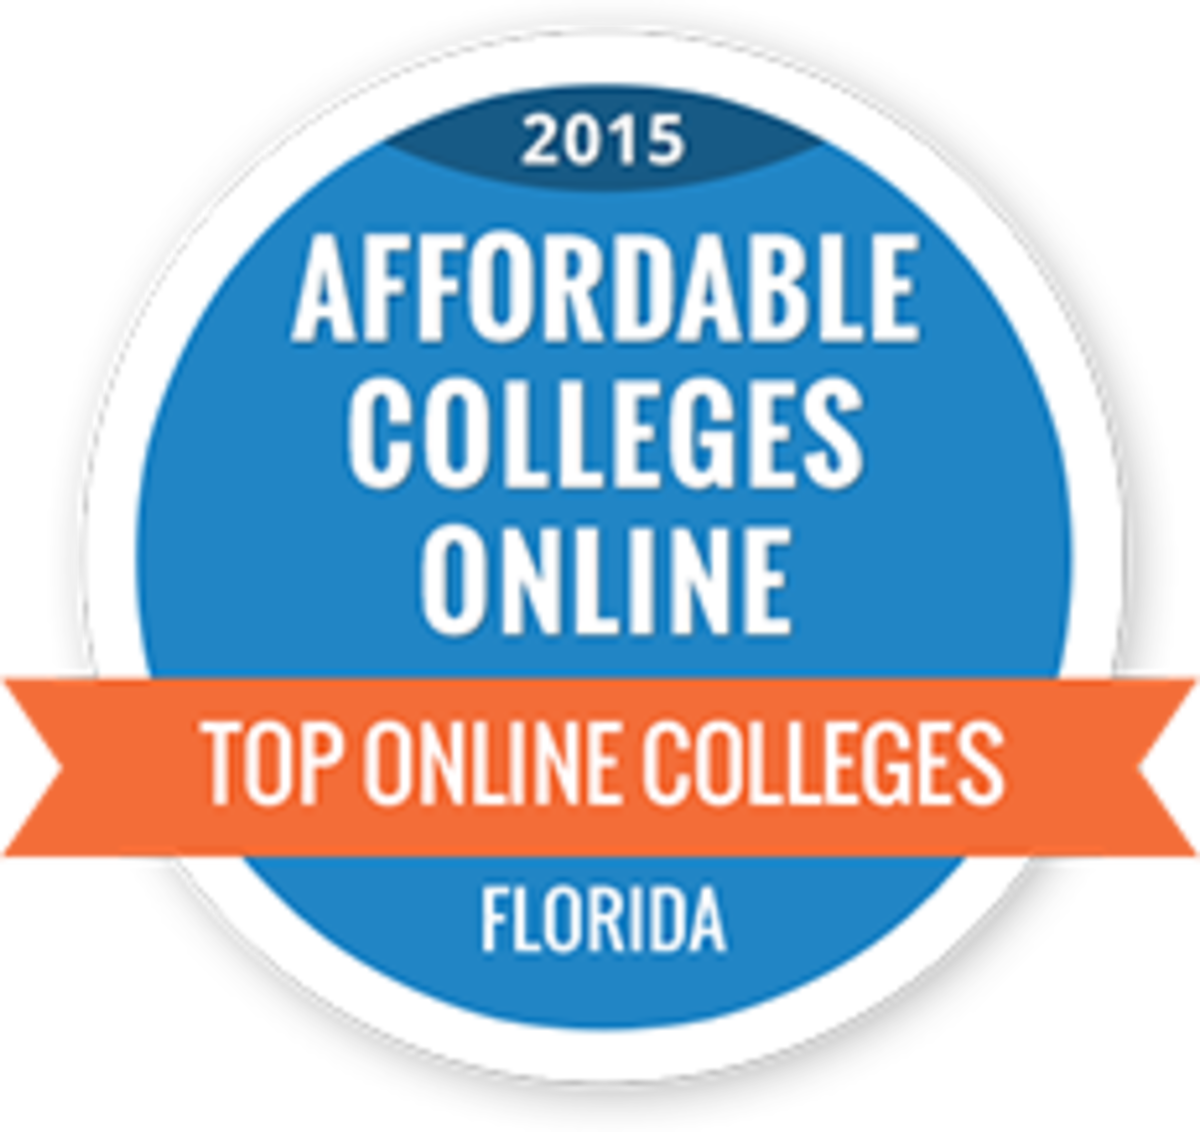 UNF places fourth on Affordable College’s Best Online Programs list